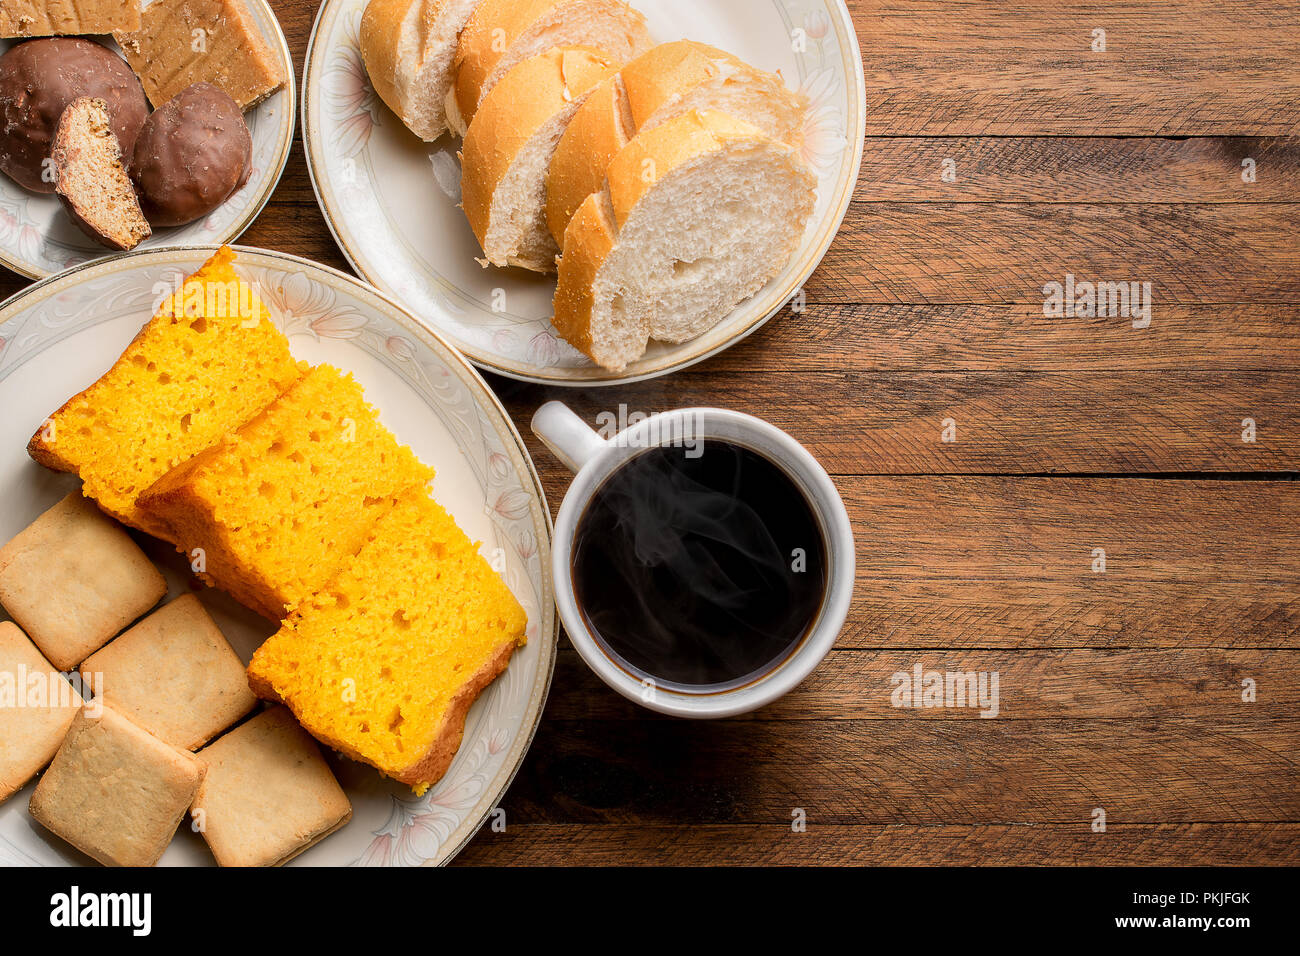 Breakfast food on a wooden table, carrot cake, bread, cookies and a hot coffee with steam coming out Stock Photo